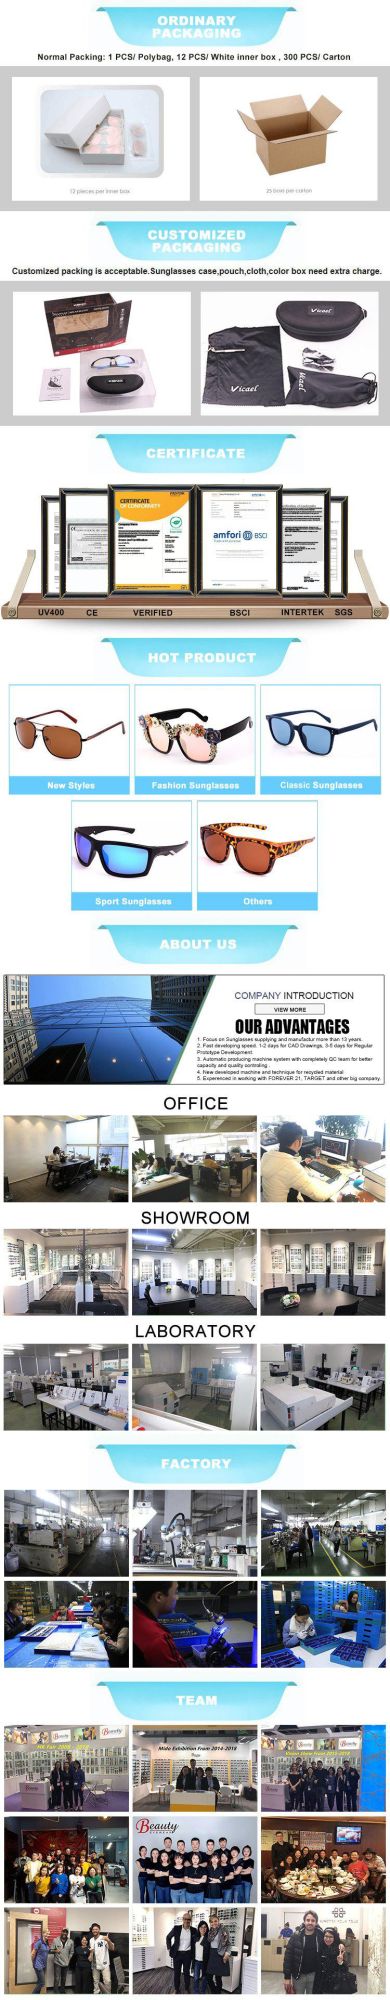 2019 Hot Selling Safety Sunglass with Blue Rubber